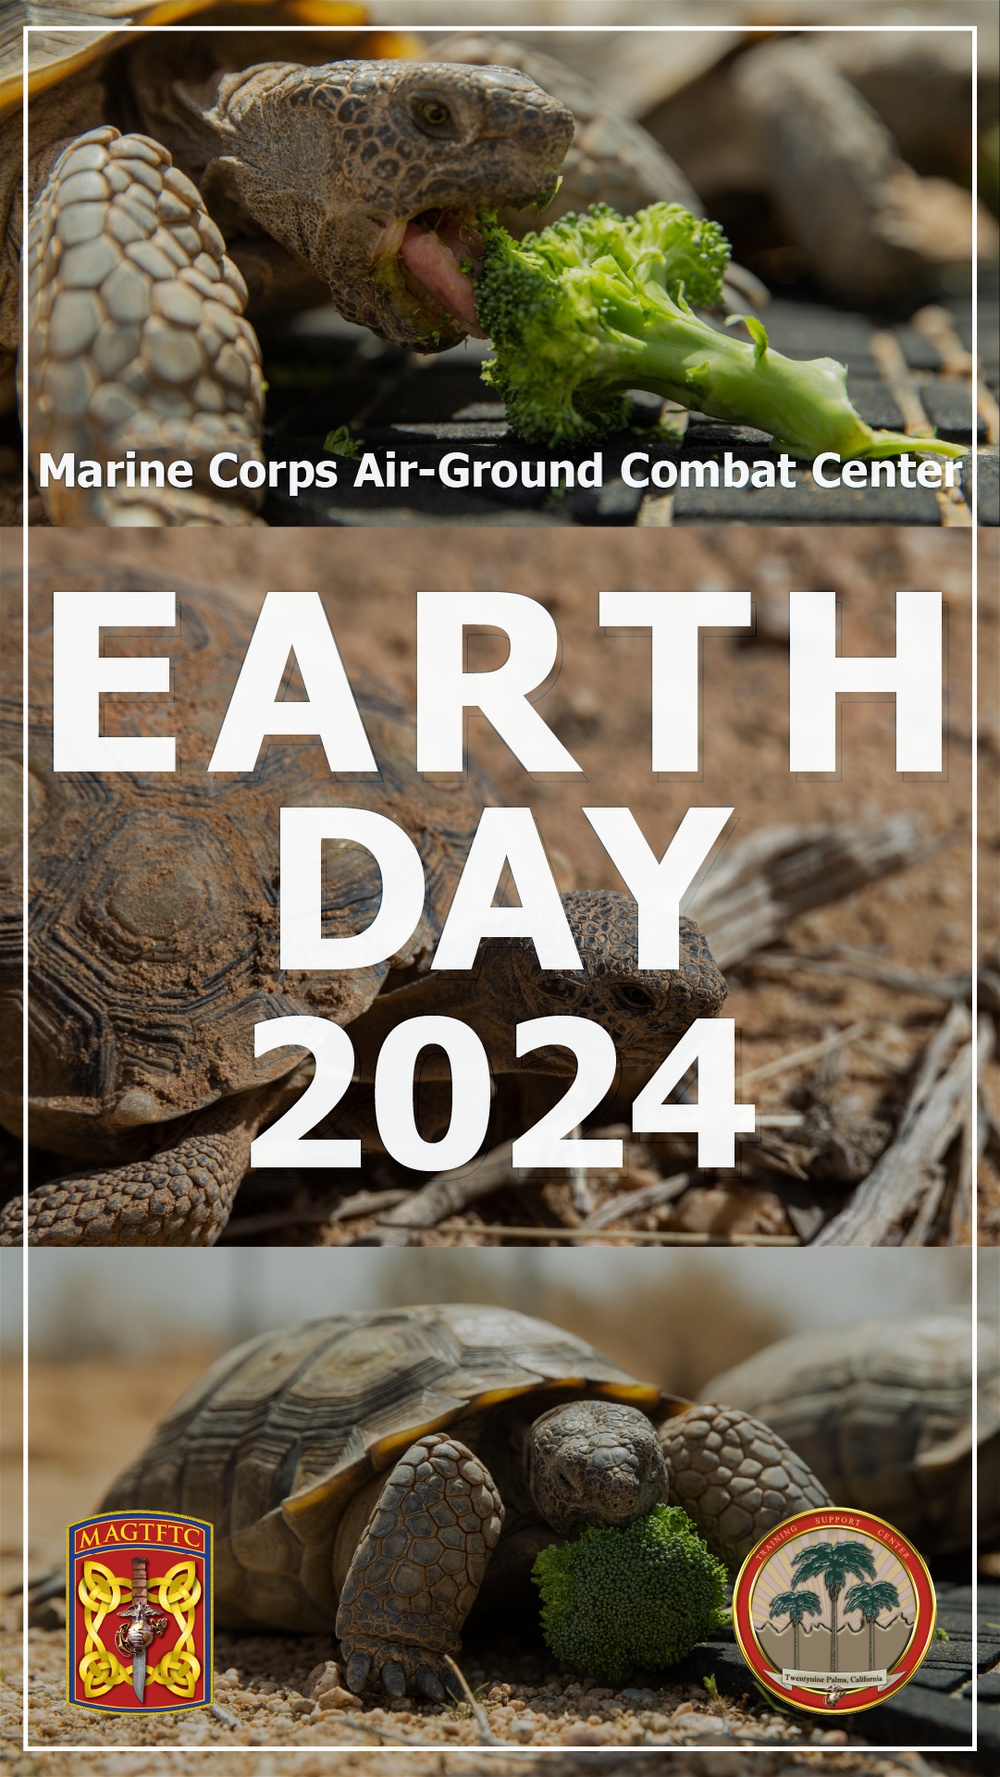 The Combat Center celebrates Earth Day 2024